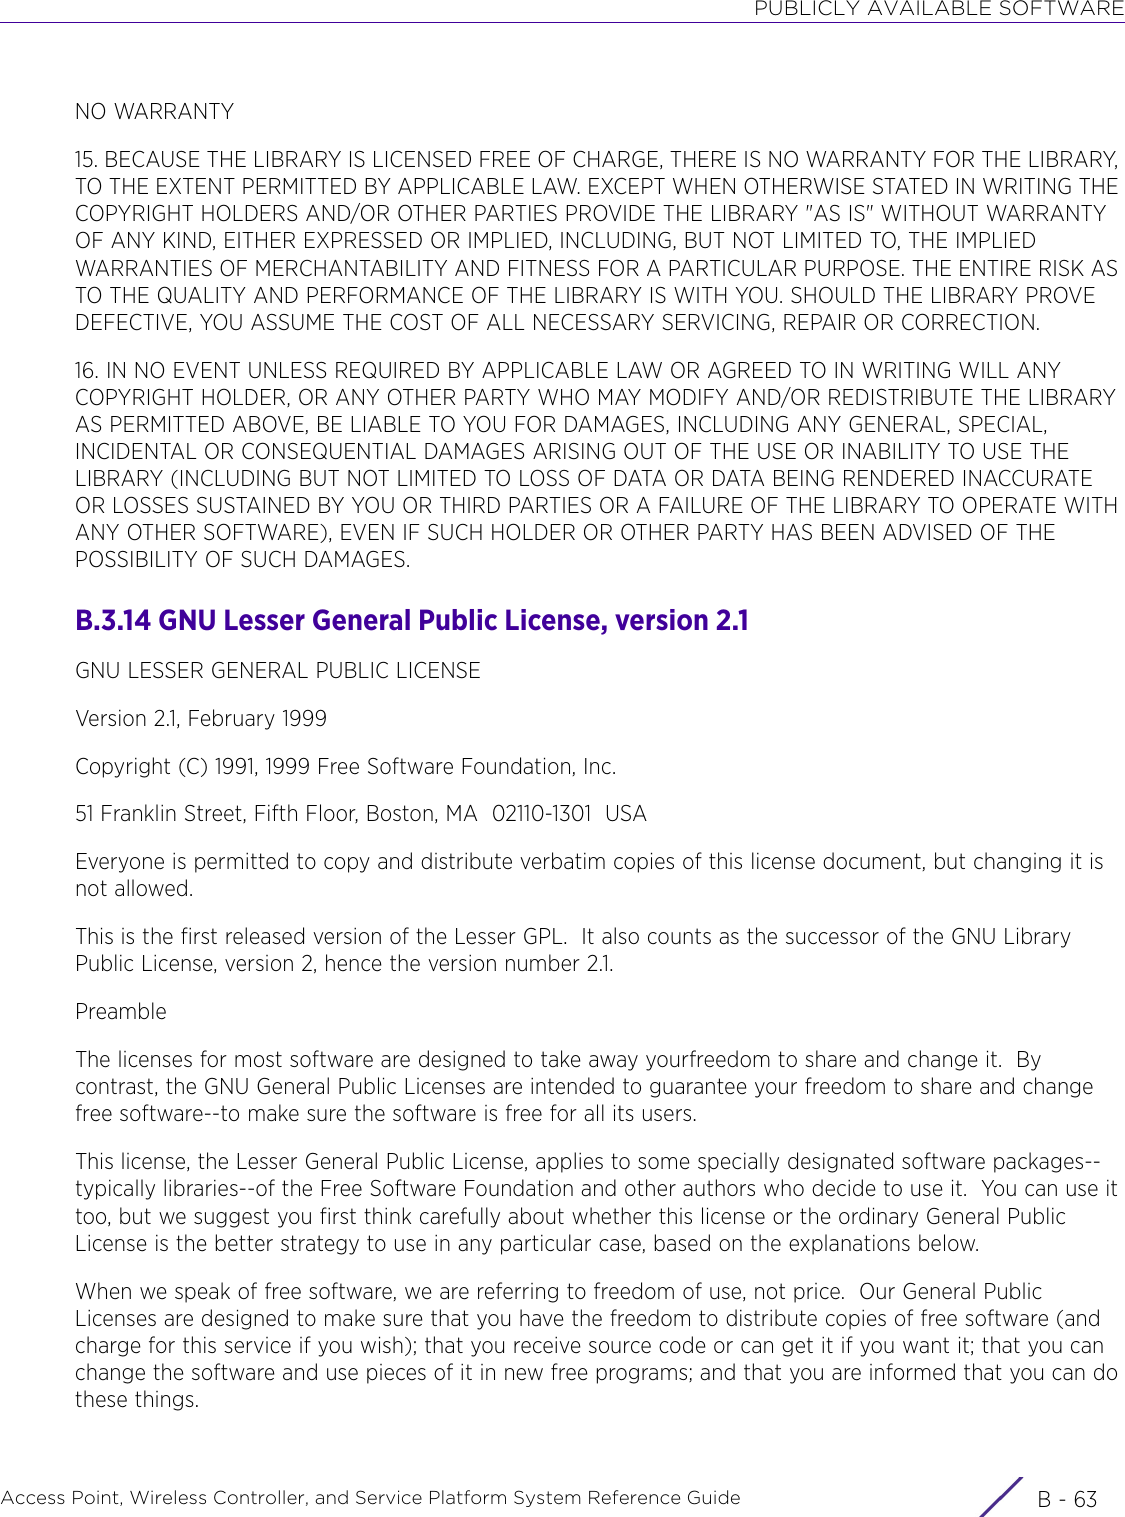 PUBLICLY AVAILABLE SOFTWAREAccess Point, Wireless Controller, and Service Platform System Reference Guide B - 63NO WARRANTY15. BECAUSE THE LIBRARY IS LICENSED FREE OF CHARGE, THERE IS NO WARRANTY FOR THE LIBRARY, TO THE EXTENT PERMITTED BY APPLICABLE LAW. EXCEPT WHEN OTHERWISE STATED IN WRITING THE COPYRIGHT HOLDERS AND/OR OTHER PARTIES PROVIDE THE LIBRARY &quot;AS IS&quot; WITHOUT WARRANTY OF ANY KIND, EITHER EXPRESSED OR IMPLIED, INCLUDING, BUT NOT LIMITED TO, THE IMPLIED WARRANTIES OF MERCHANTABILITY AND FITNESS FOR A PARTICULAR PURPOSE. THE ENTIRE RISK AS TO THE QUALITY AND PERFORMANCE OF THE LIBRARY IS WITH YOU. SHOULD THE LIBRARY PROVE DEFECTIVE, YOU ASSUME THE COST OF ALL NECESSARY SERVICING, REPAIR OR CORRECTION.16. IN NO EVENT UNLESS REQUIRED BY APPLICABLE LAW OR AGREED TO IN WRITING WILL ANY COPYRIGHT HOLDER, OR ANY OTHER PARTY WHO MAY MODIFY AND/OR REDISTRIBUTE THE LIBRARY AS PERMITTED ABOVE, BE LIABLE TO YOU FOR DAMAGES, INCLUDING ANY GENERAL, SPECIAL, INCIDENTAL OR CONSEQUENTIAL DAMAGES ARISING OUT OF THE USE OR INABILITY TO USE THE LIBRARY (INCLUDING BUT NOT LIMITED TO LOSS OF DATA OR DATA BEING RENDERED INACCURATE OR LOSSES SUSTAINED BY YOU OR THIRD PARTIES OR A FAILURE OF THE LIBRARY TO OPERATE WITH ANY OTHER SOFTWARE), EVEN IF SUCH HOLDER OR OTHER PARTY HAS BEEN ADVISED OF THE POSSIBILITY OF SUCH DAMAGES.B.3.14 GNU Lesser General Public License, version 2.1GNU LESSER GENERAL PUBLIC LICENSEVersion 2.1, February 1999Copyright (C) 1991, 1999 Free Software Foundation, Inc.51 Franklin Street, Fifth Floor, Boston, MA  02110-1301  USAEveryone is permitted to copy and distribute verbatim copies of this license document, but changing it is not allowed.This is the first released version of the Lesser GPL.  It also counts as the successor of the GNU Library Public License, version 2, hence the version number 2.1.PreambleThe licenses for most software are designed to take away yourfreedom to share and change it.  By contrast, the GNU General Public Licenses are intended to guarantee your freedom to share and change free software--to make sure the software is free for all its users.This license, the Lesser General Public License, applies to some specially designated software packages--typically libraries--of the Free Software Foundation and other authors who decide to use it.  You can use it too, but we suggest you first think carefully about whether this license or the ordinary General Public License is the better strategy to use in any particular case, based on the explanations below.When we speak of free software, we are referring to freedom of use, not price.  Our General Public Licenses are designed to make sure that you have the freedom to distribute copies of free software (and charge for this service if you wish); that you receive source code or can get it if you want it; that you can change the software and use pieces of it in new free programs; and that you are informed that you can do these things.